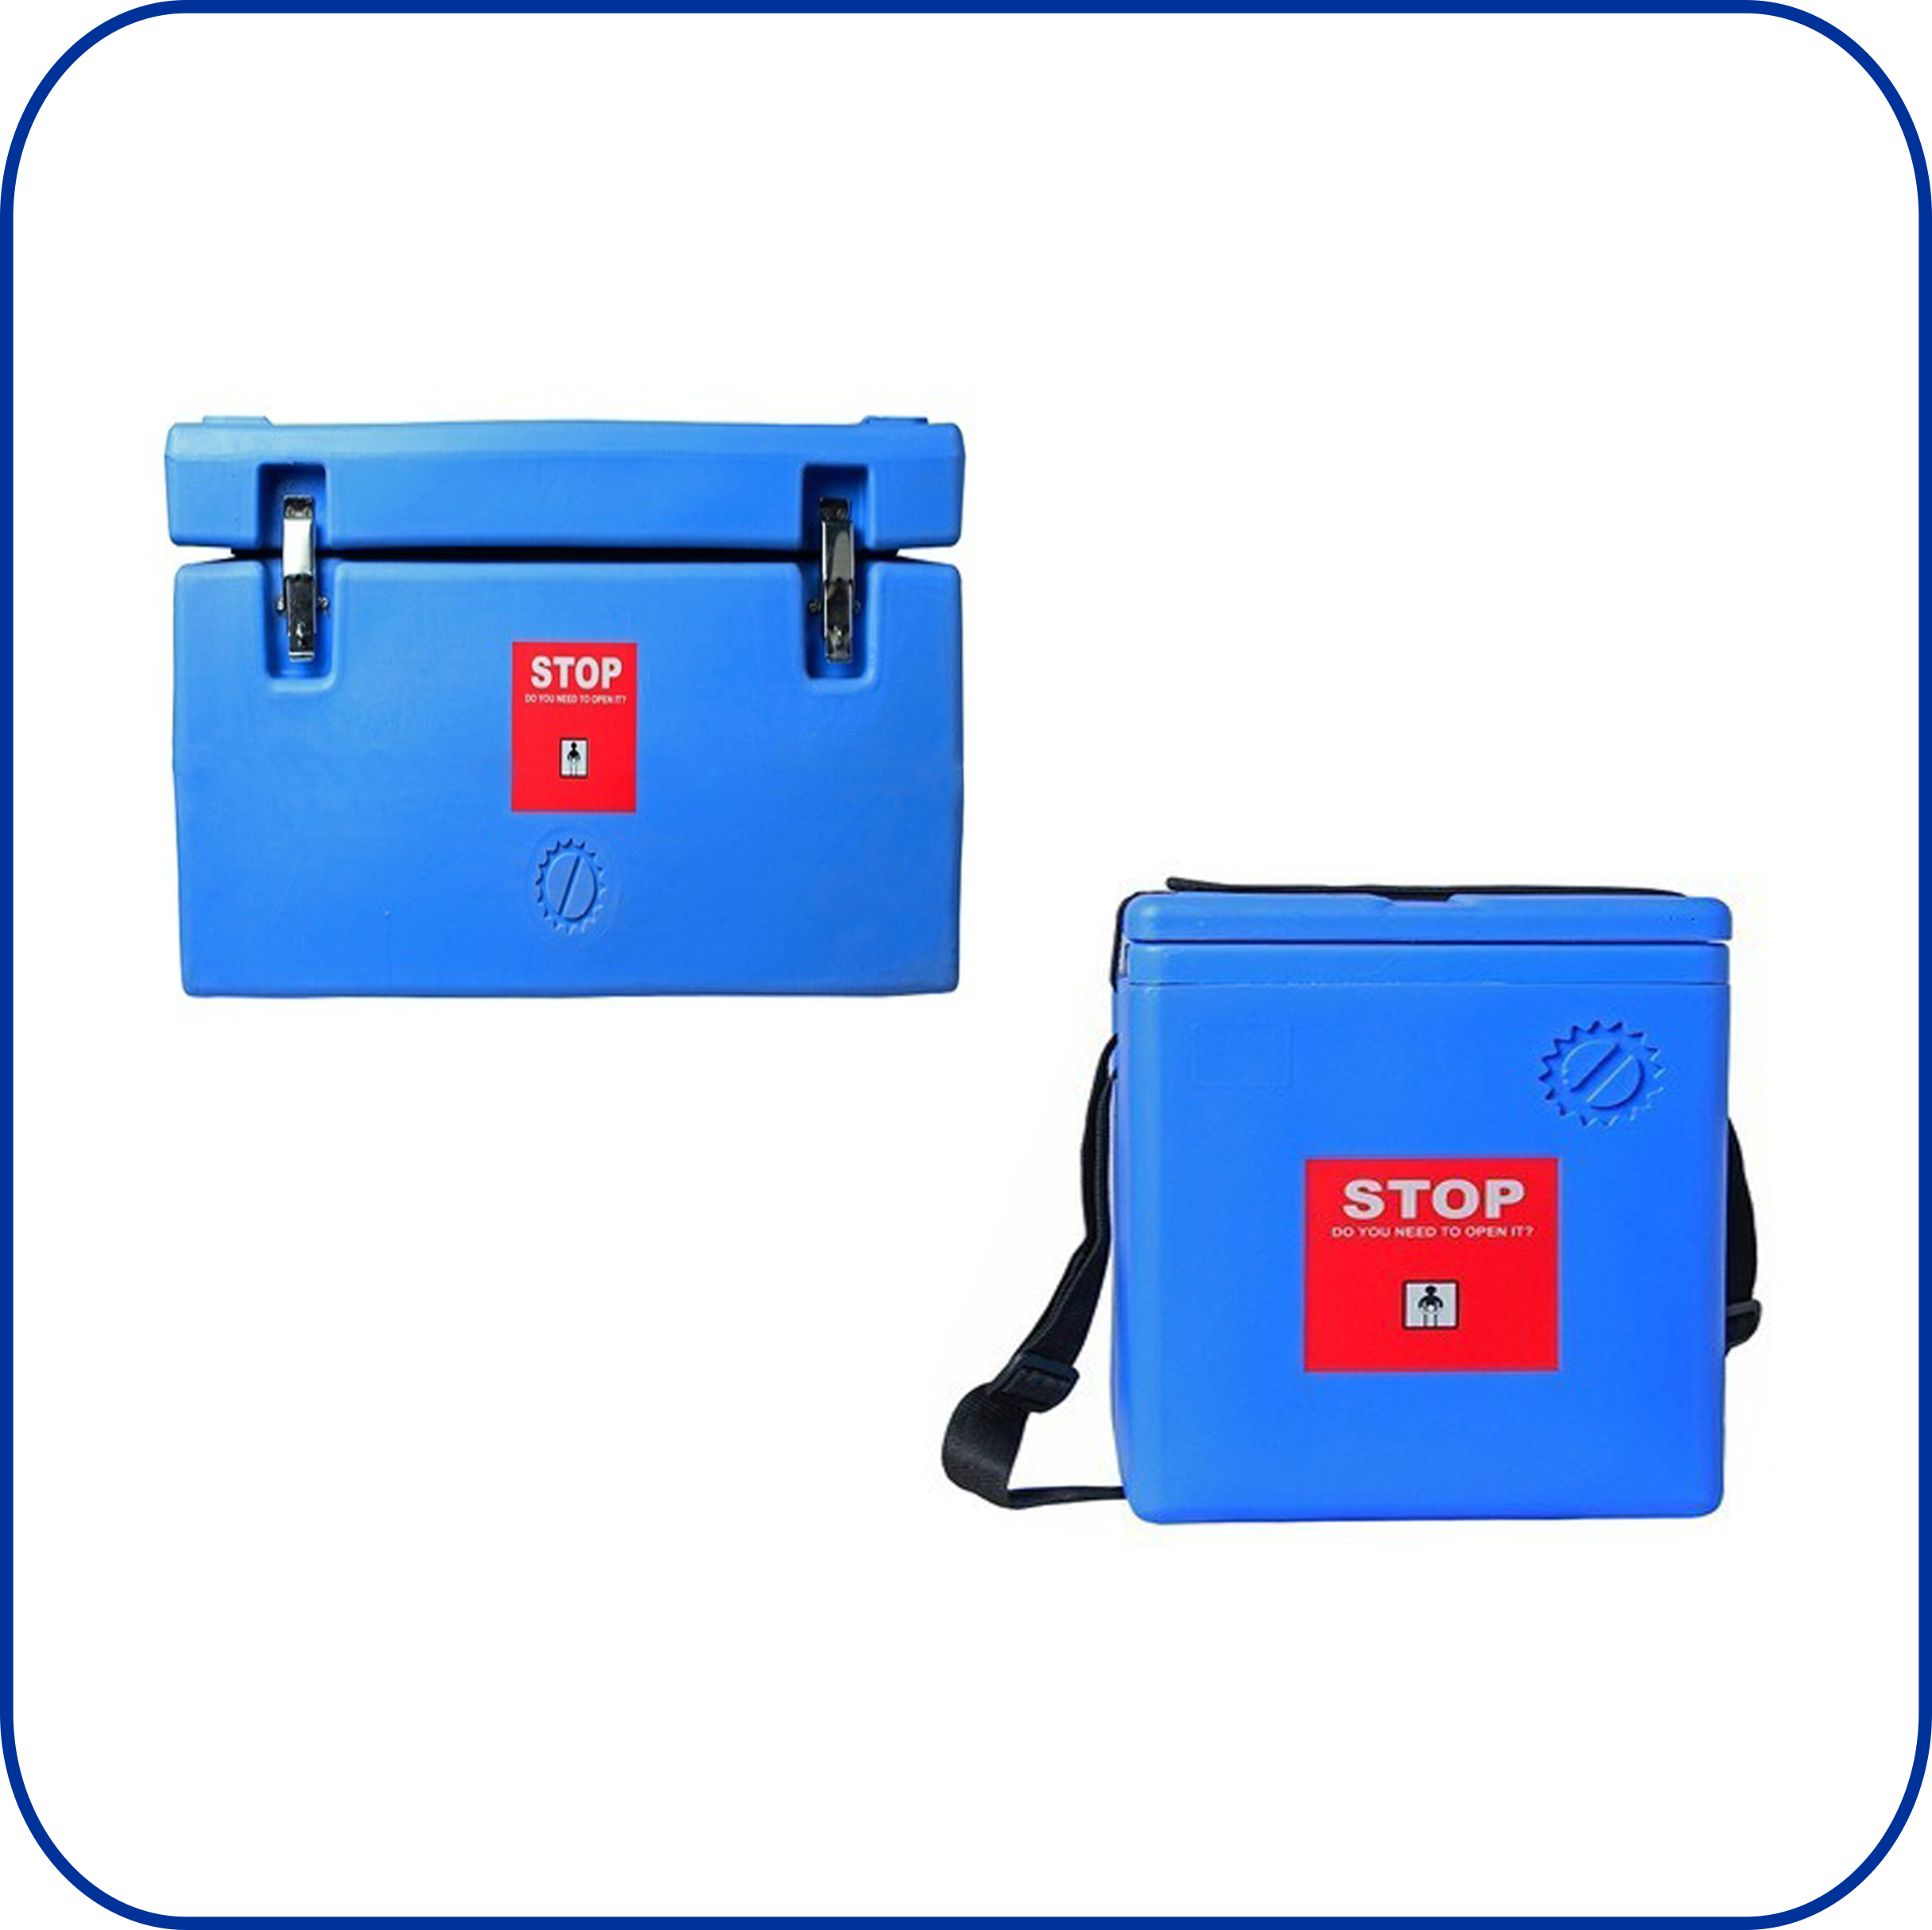 Cold Chain Equipments